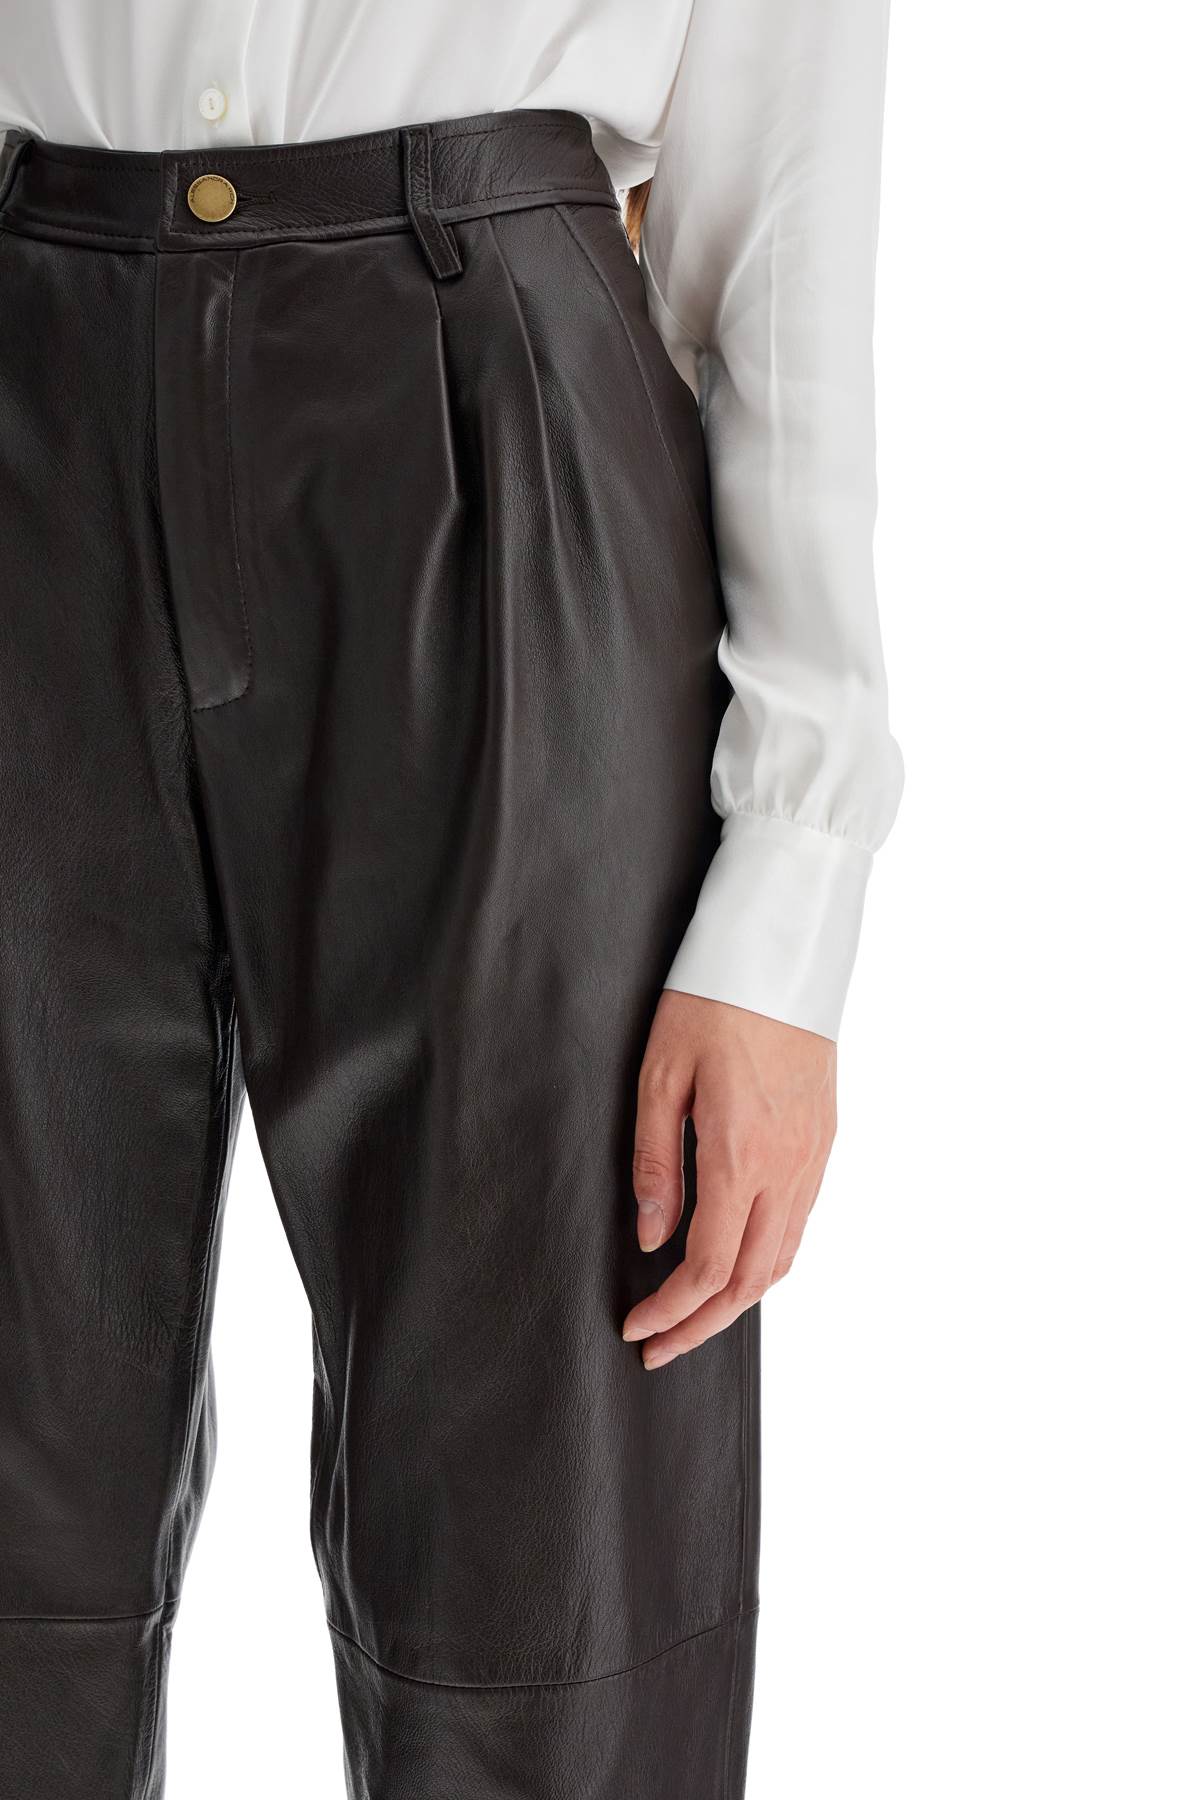 Alessandra Rich Leather Carrot Shaped Pants   Brown